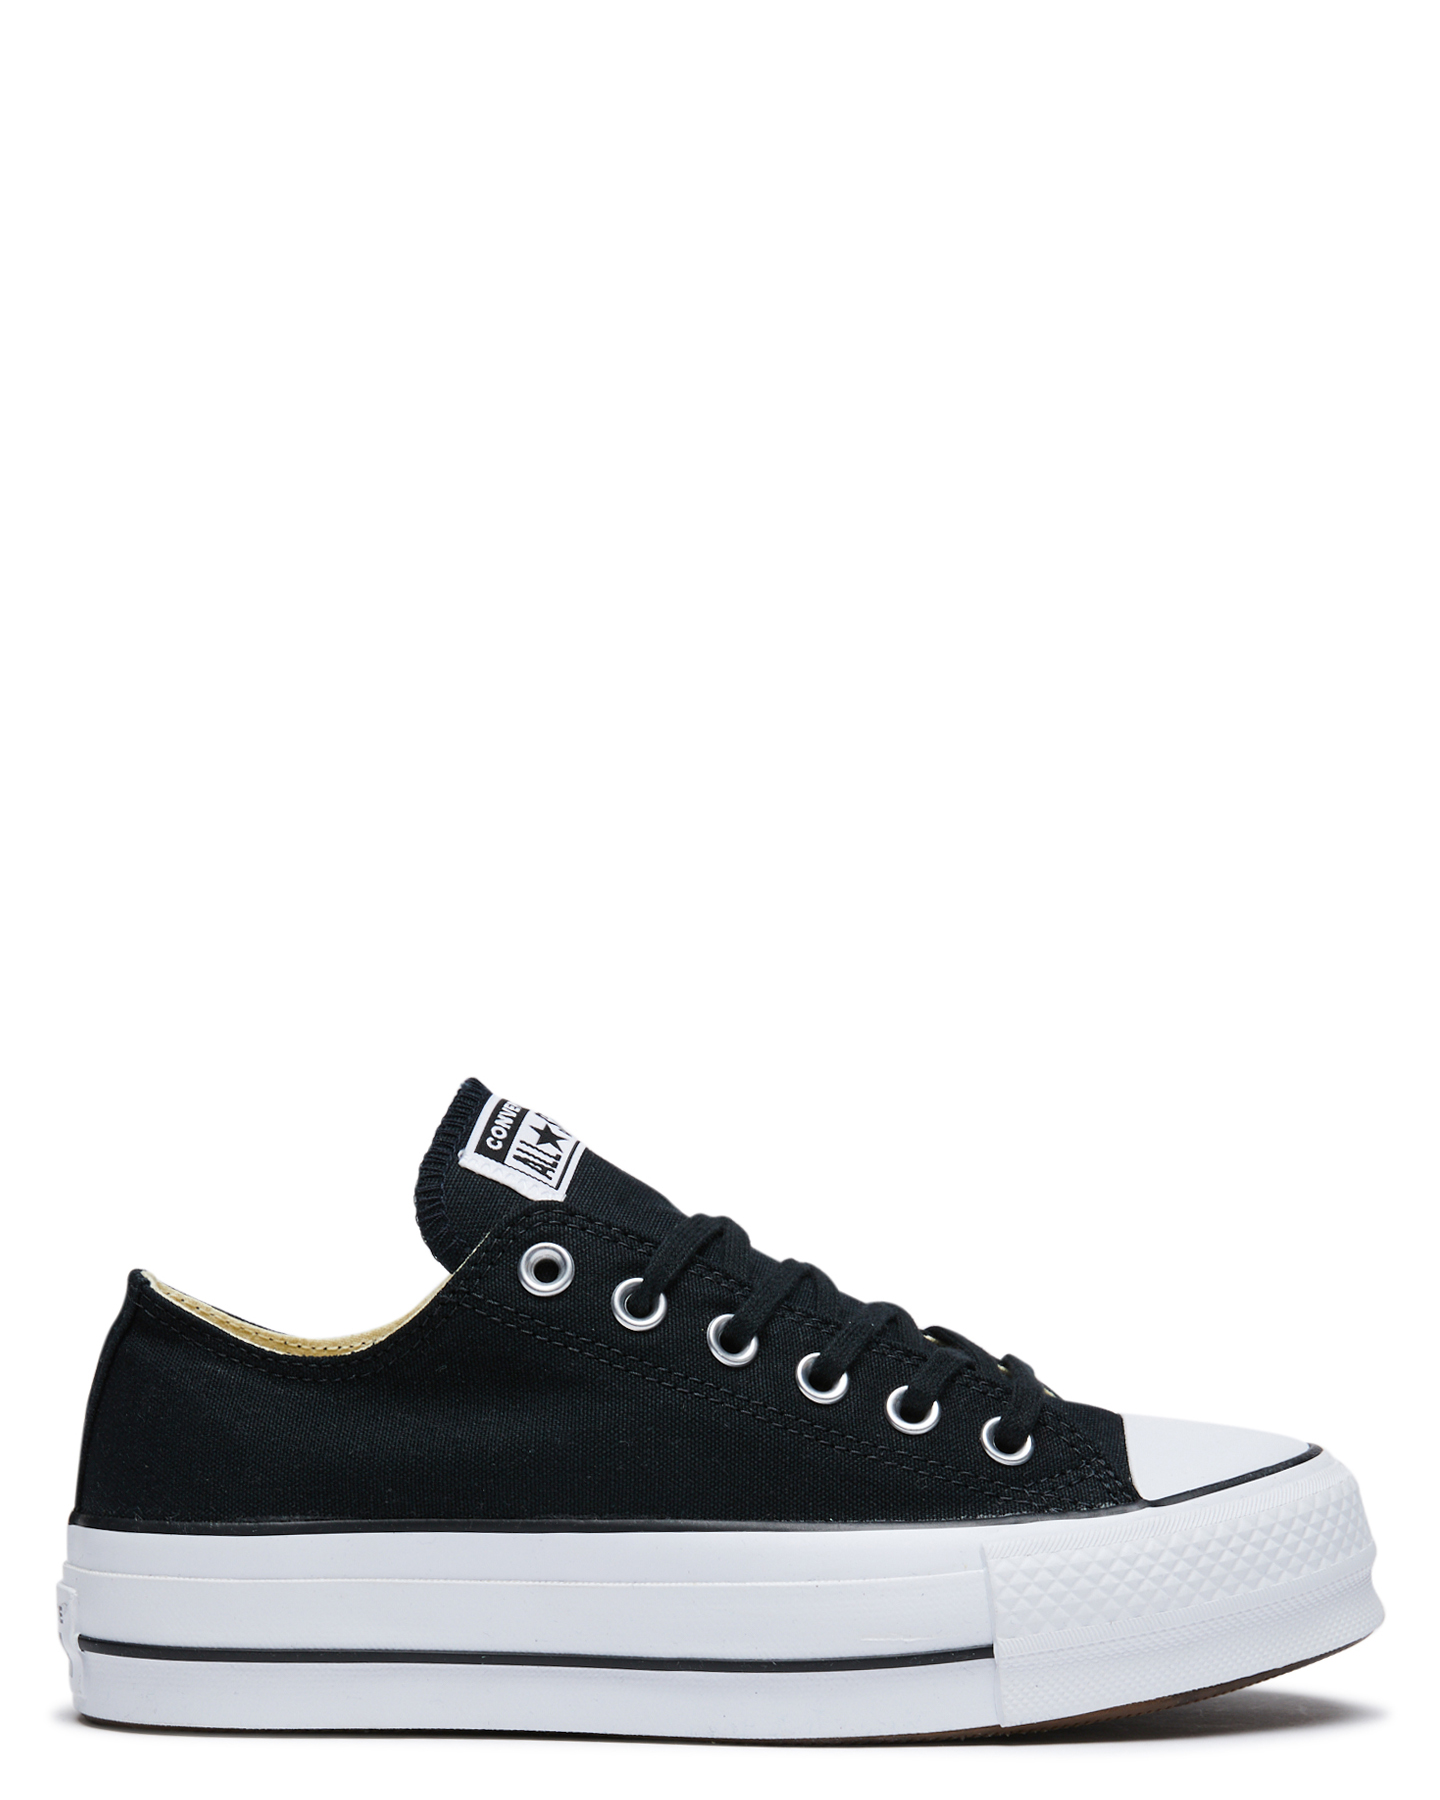 all star converse taylor